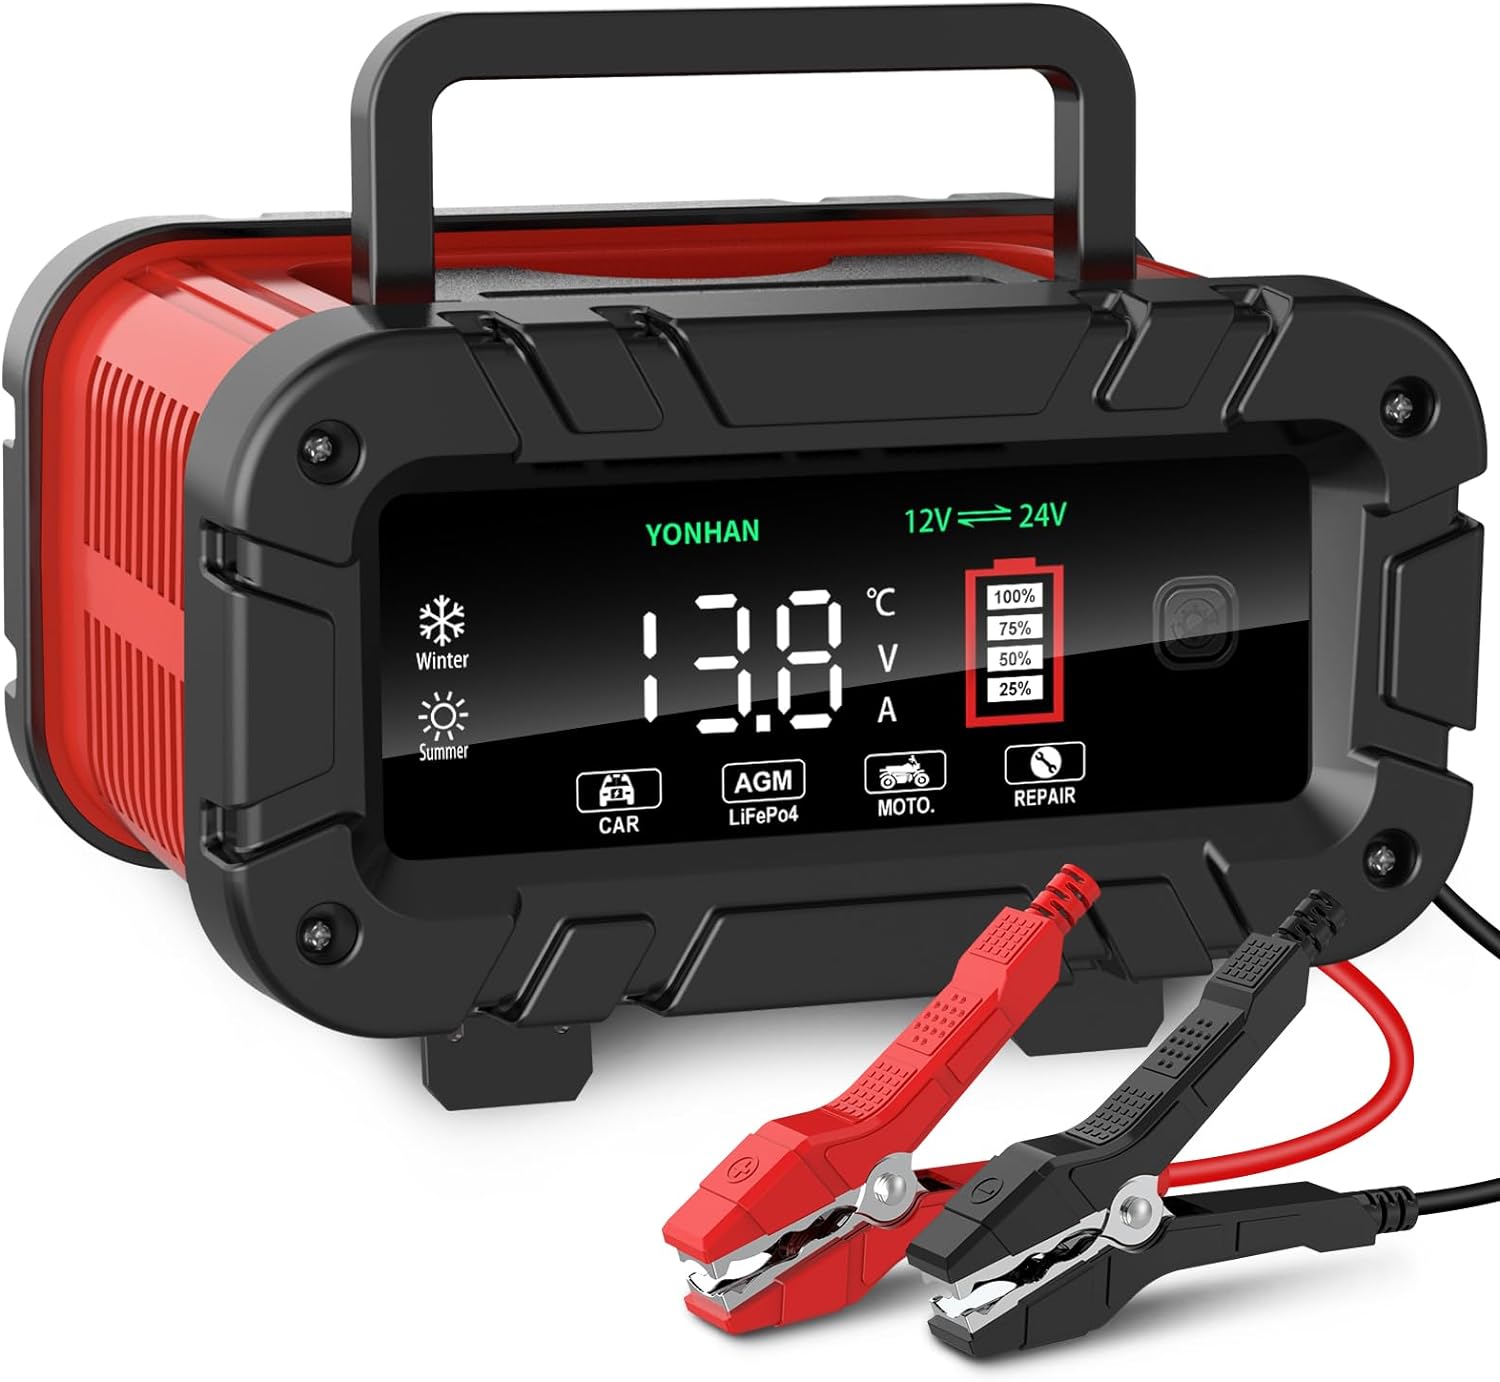 YONHAN Battery Charger 10 Amp, Upgraded 12V/24V LiFePO4 Lead Acid Portable Car Battery Charger w/Large Display Screen, Fully-Automatic Smart Trickle Charger Automotive, Battery Maintainer - YONHAN Battery Charger 10 Amp Review